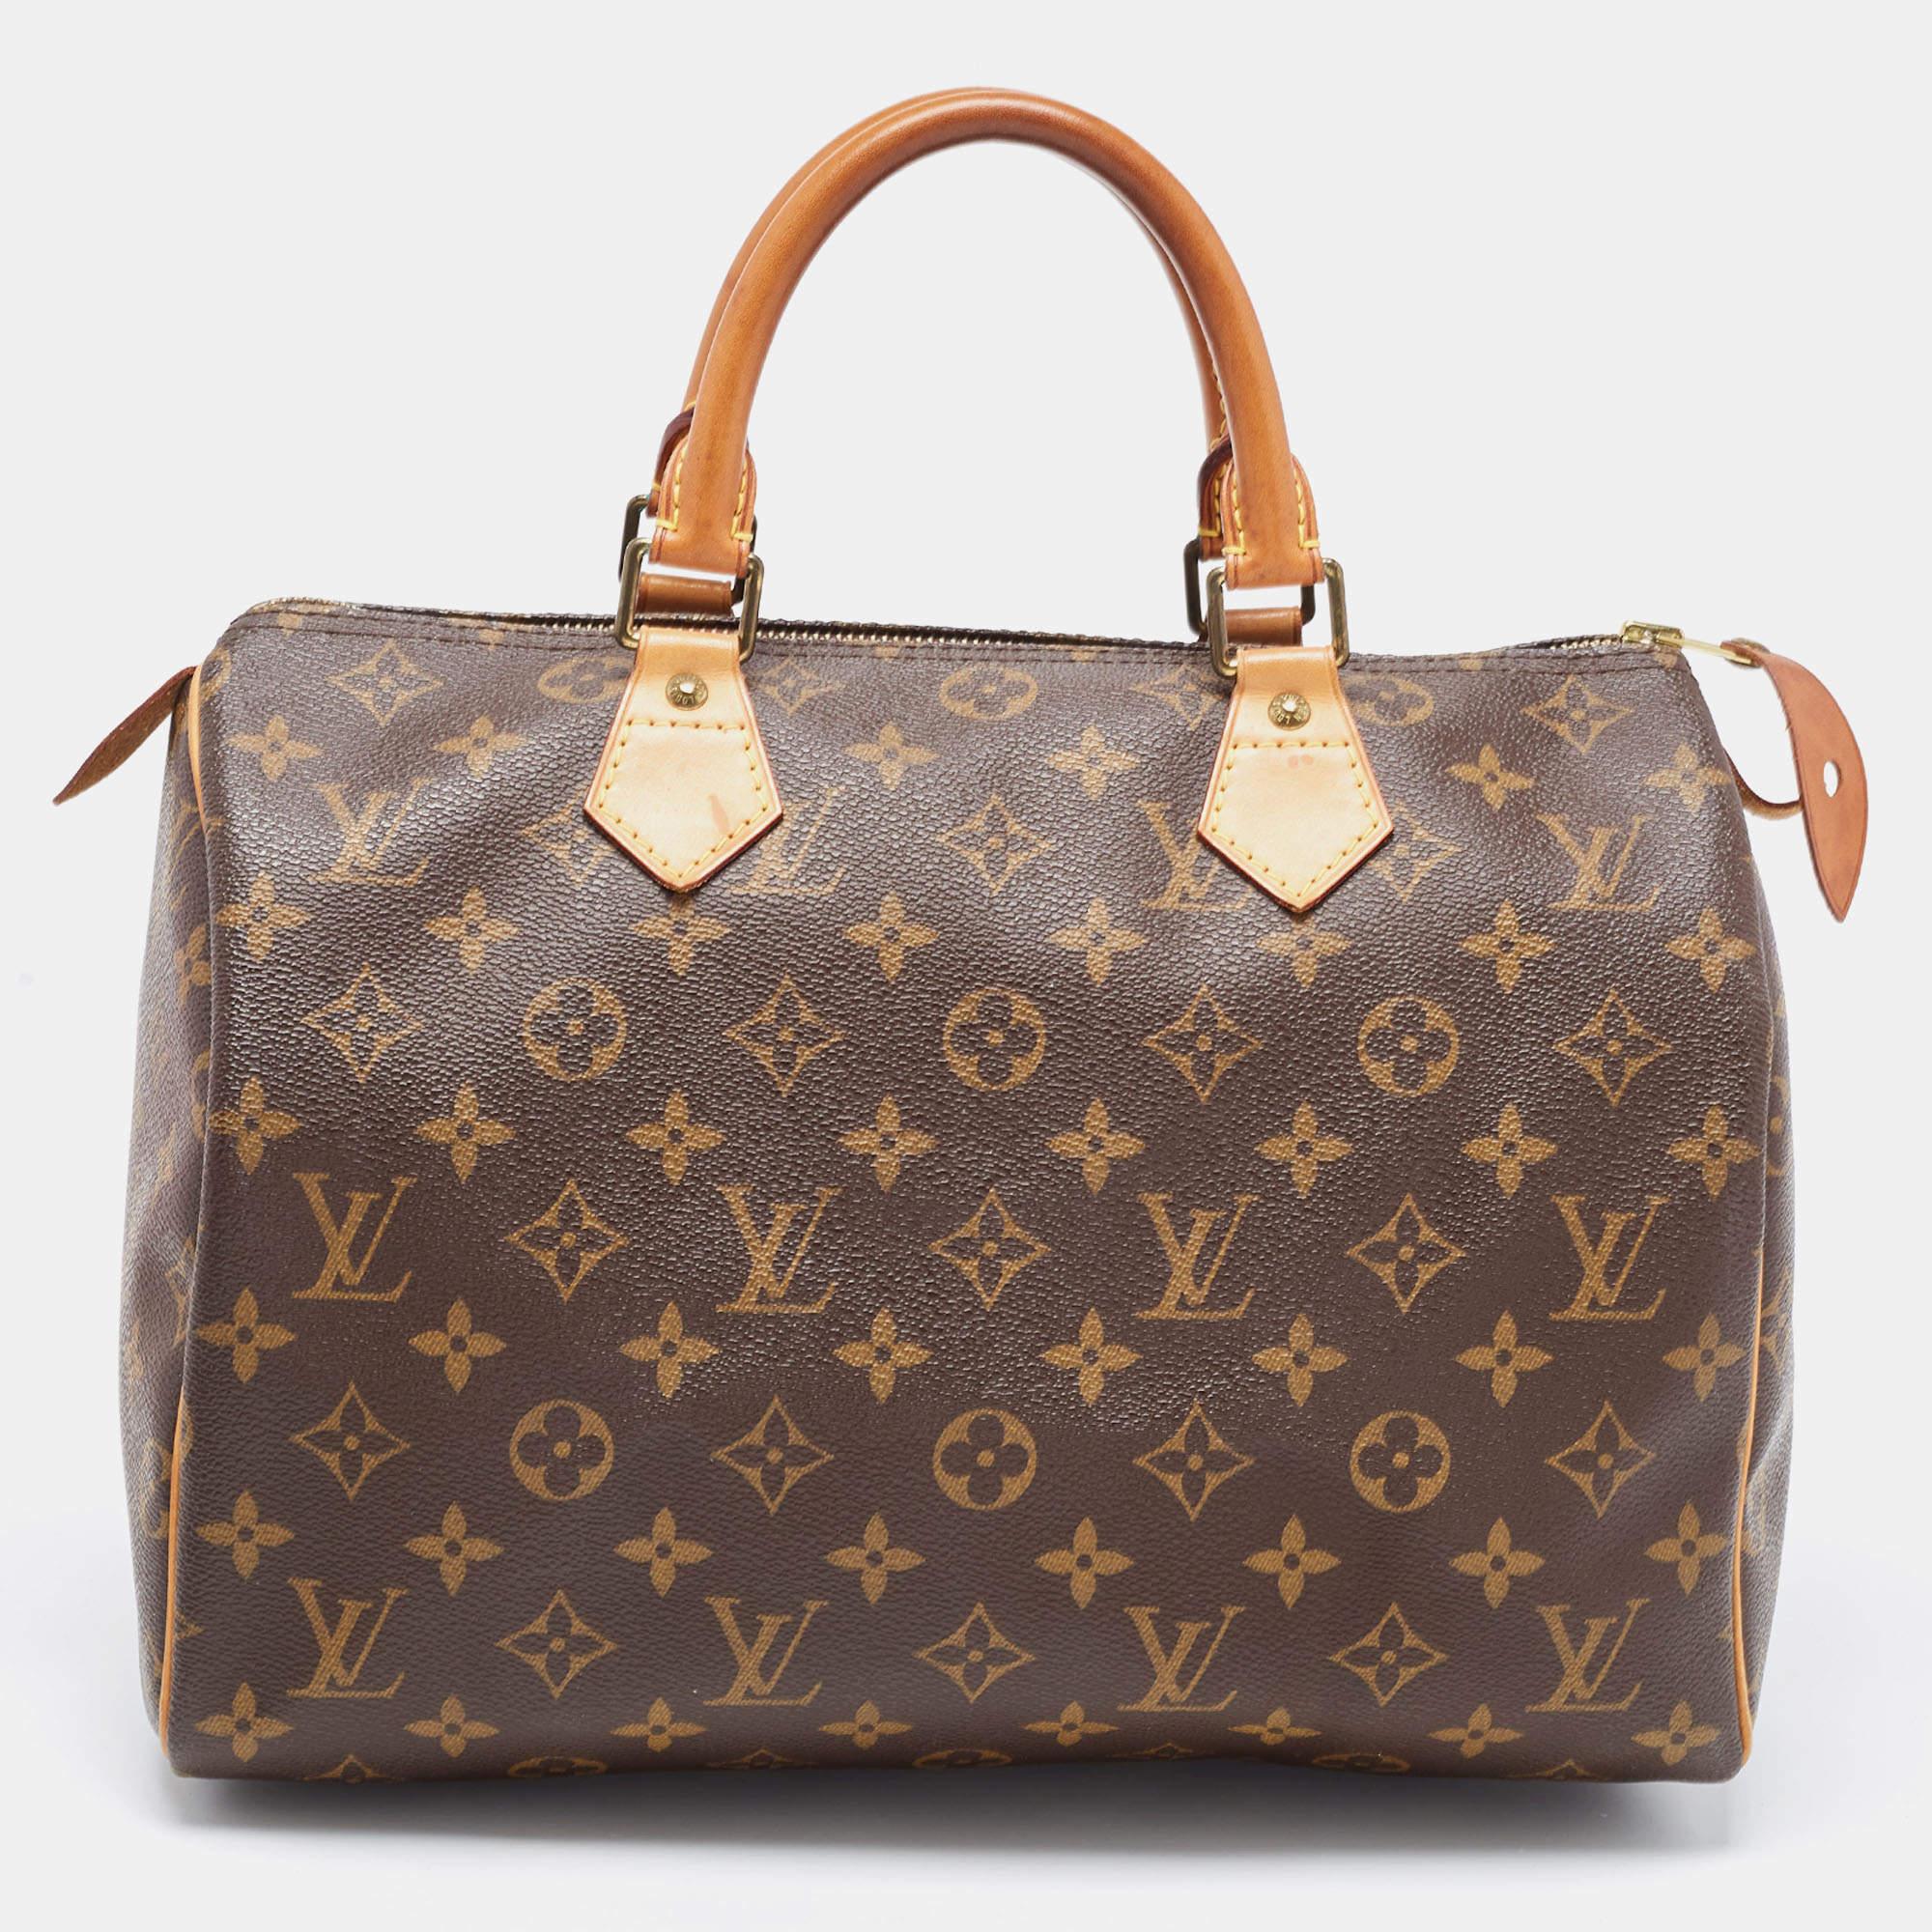 Created to provide you with everyday ease, this Louis Vuitton Speedy 30 bag features dual handles and a roomy canvas-lined interior. The usage of the signature monogram canvas in its construction offers instant brand identification. Gold-tone